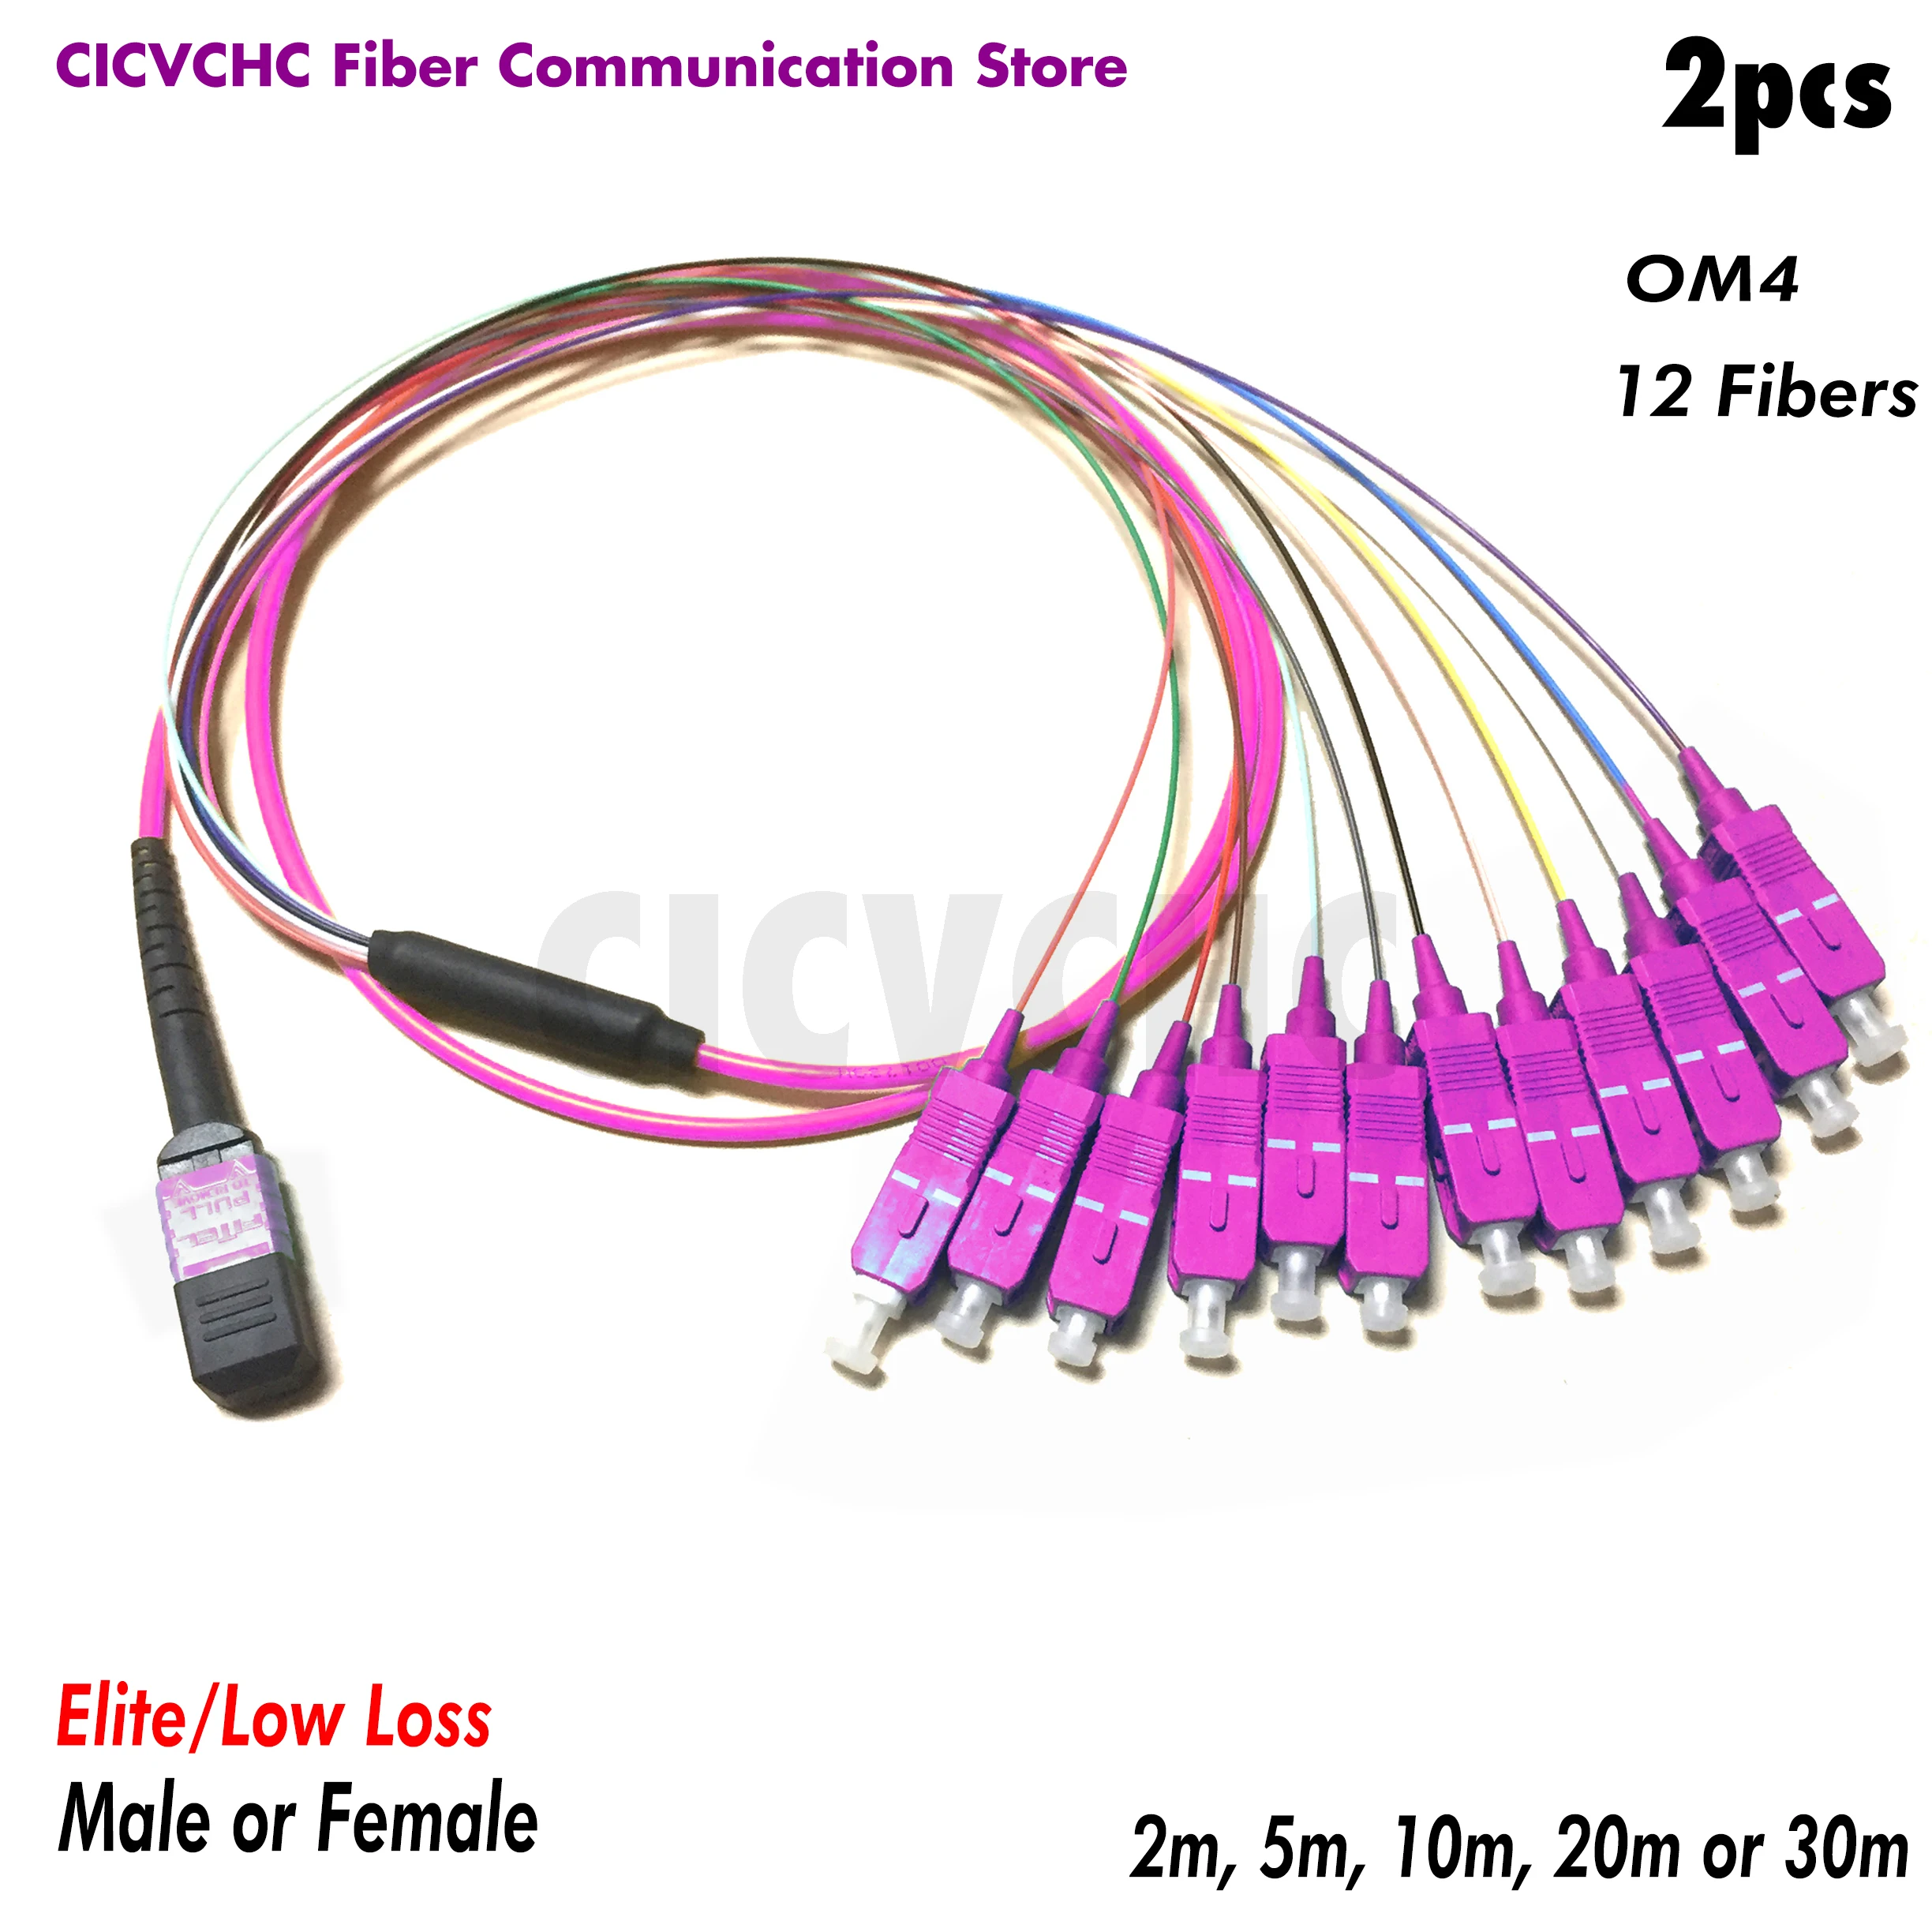 2pcs 12 fibers-MPO/UPC Fanout SC/UPC -OM4-Elite/Low loss-Male/Female with 0.9mm-2m to 30m/MPO Assembly